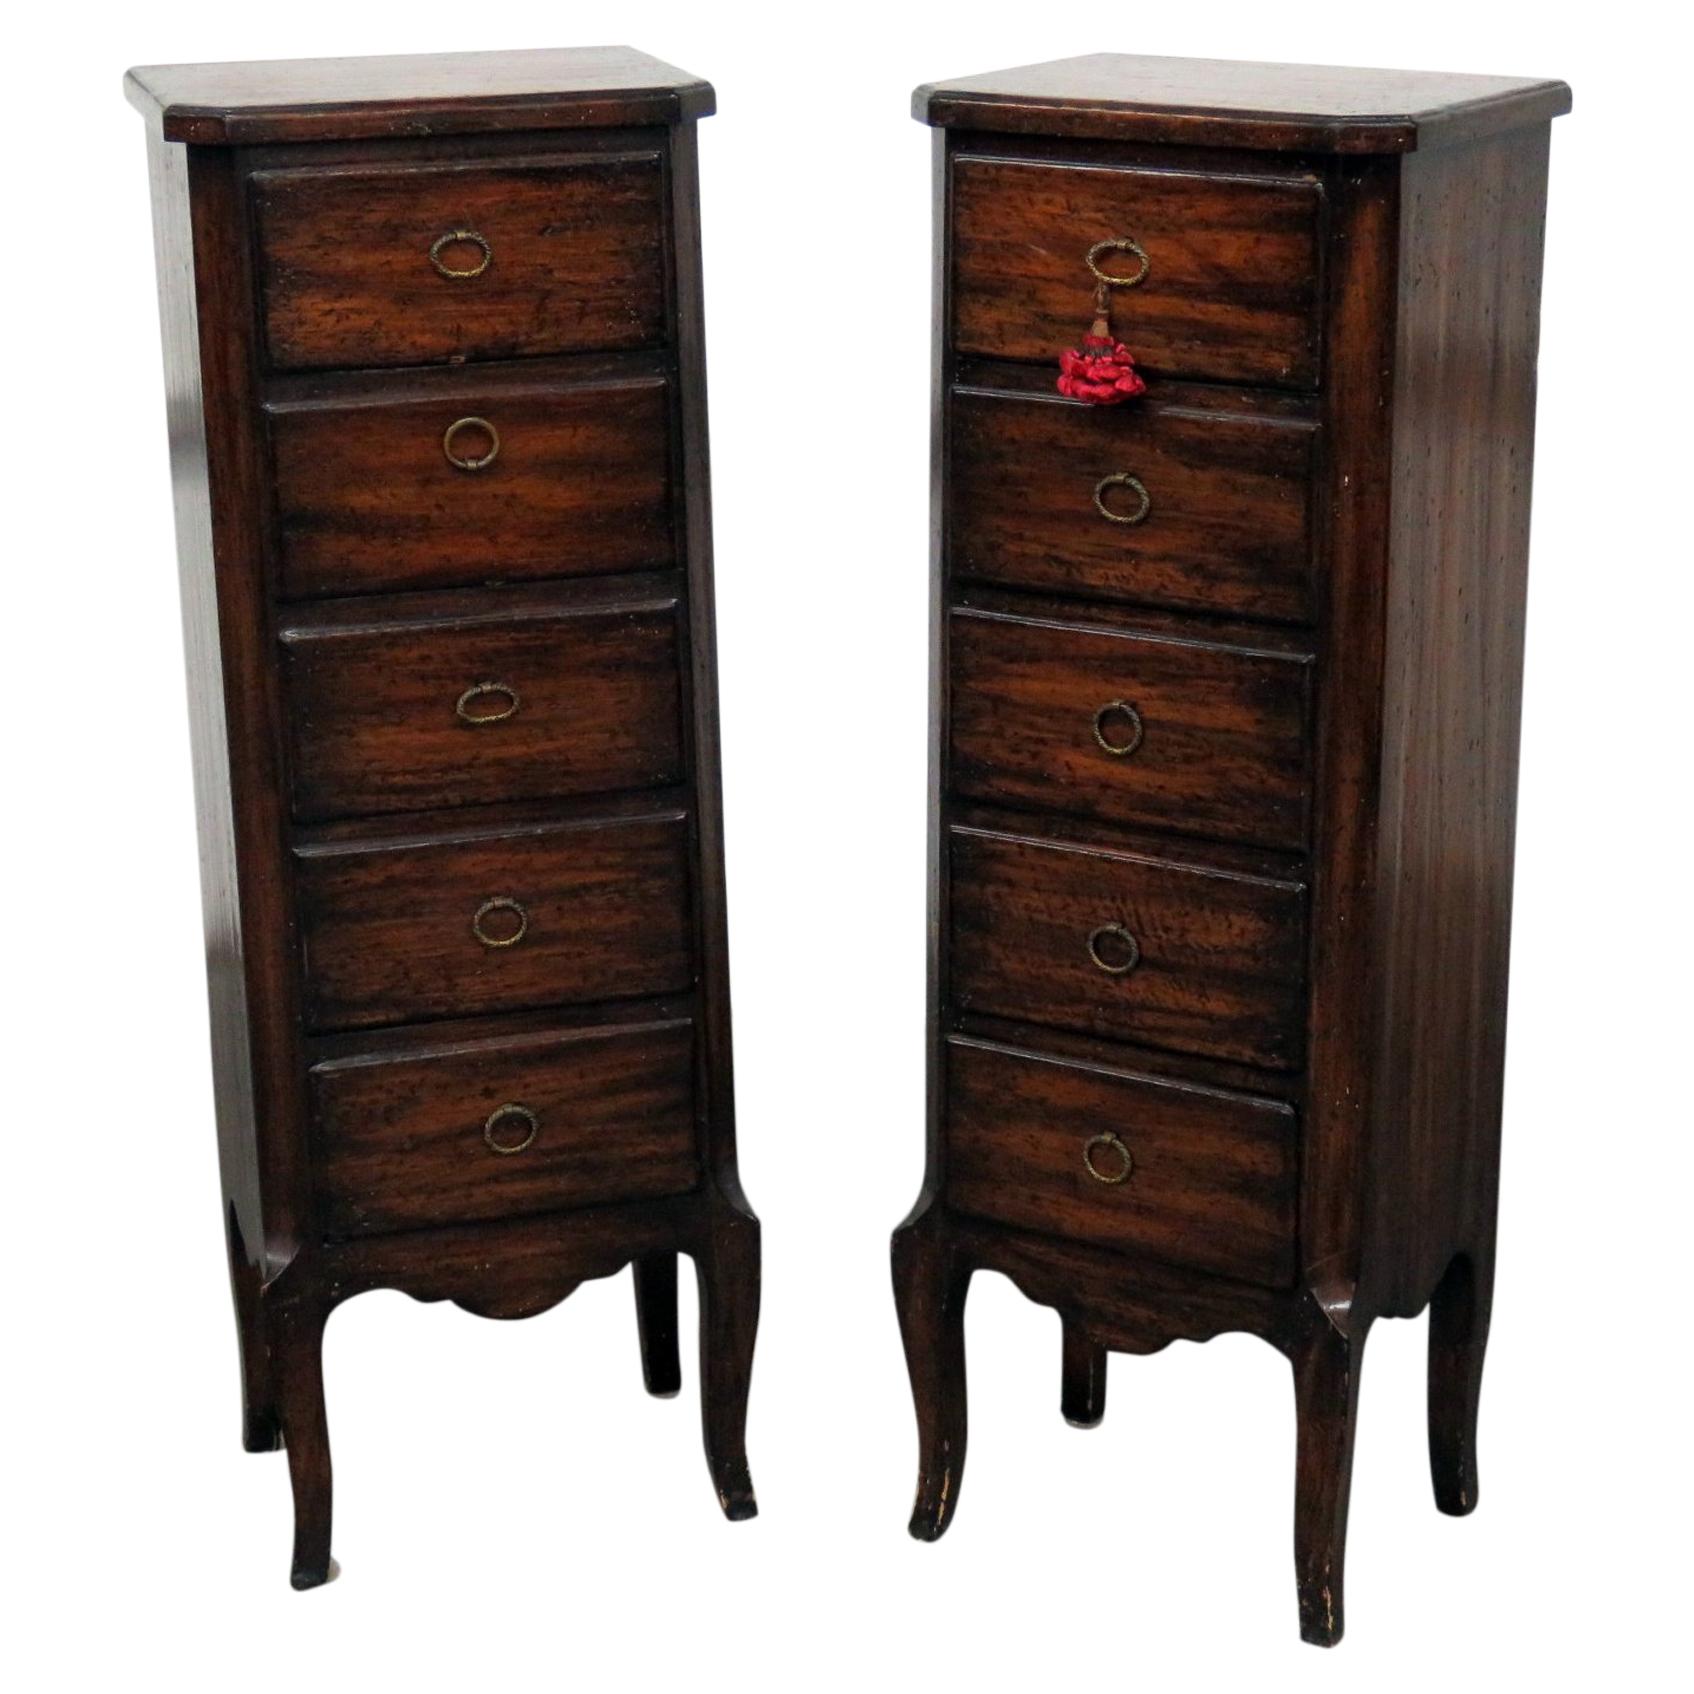 Pair of Louis XV Style Lingerie Chests